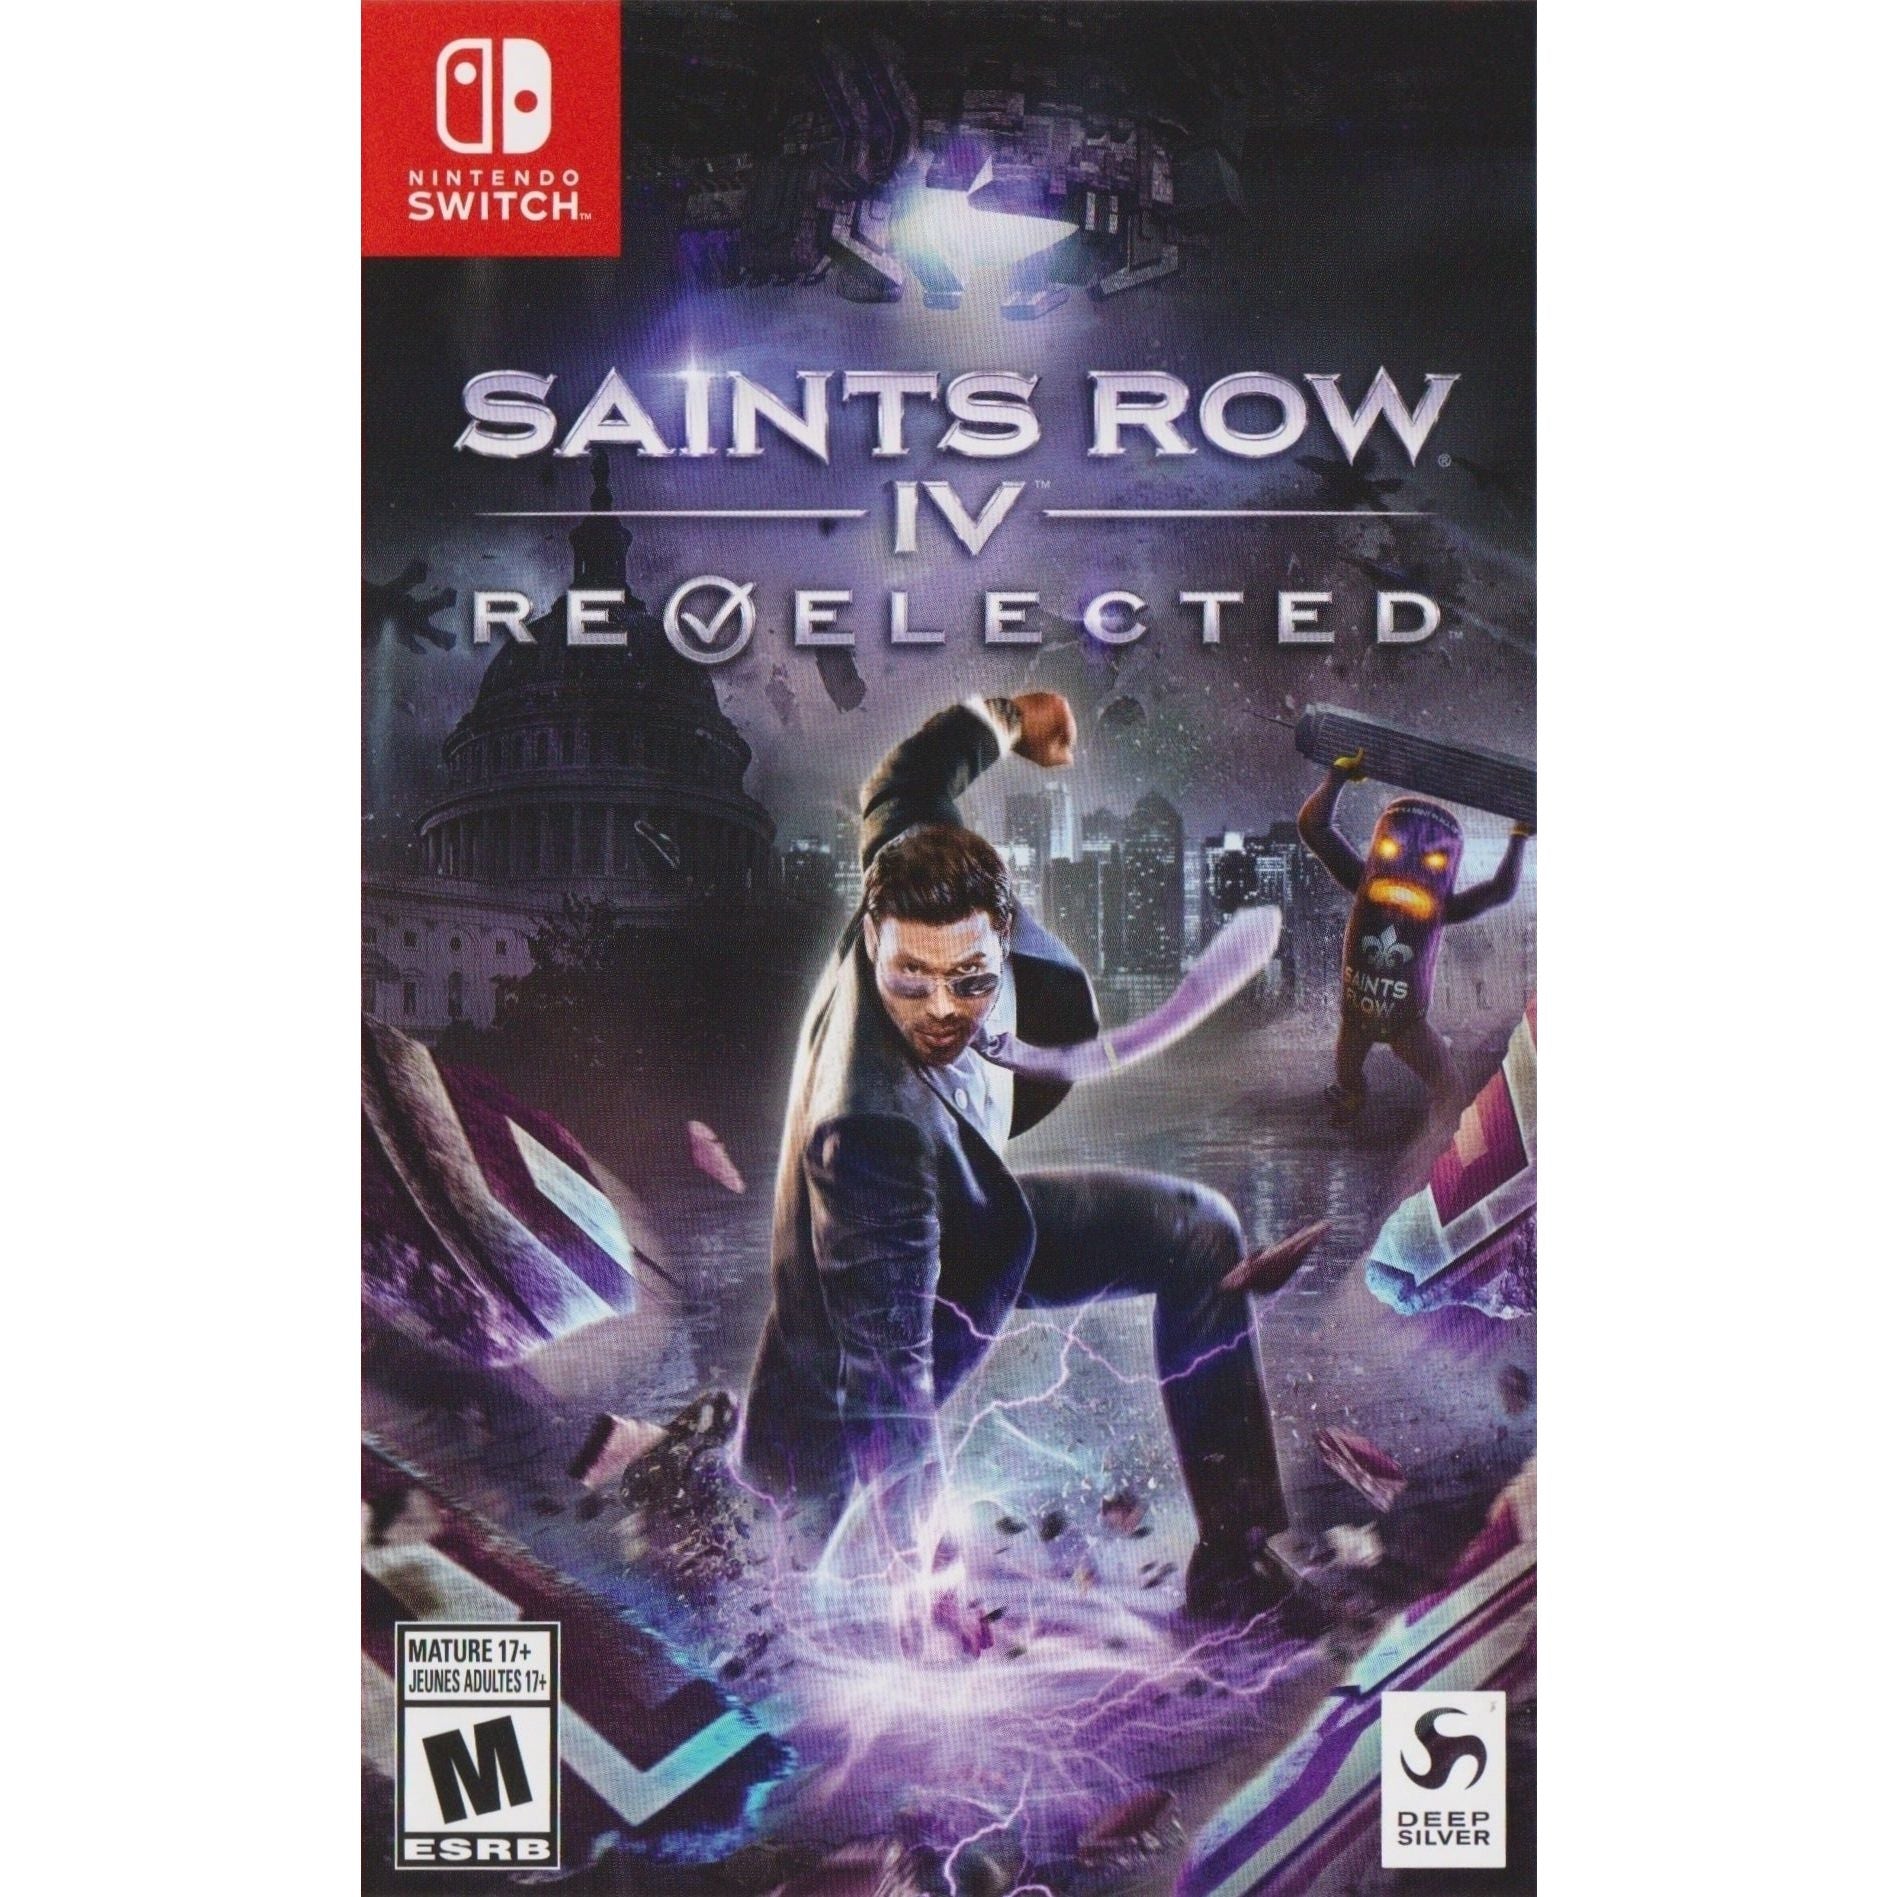 Switch - Saints Row IV Re-Elected (In Case)